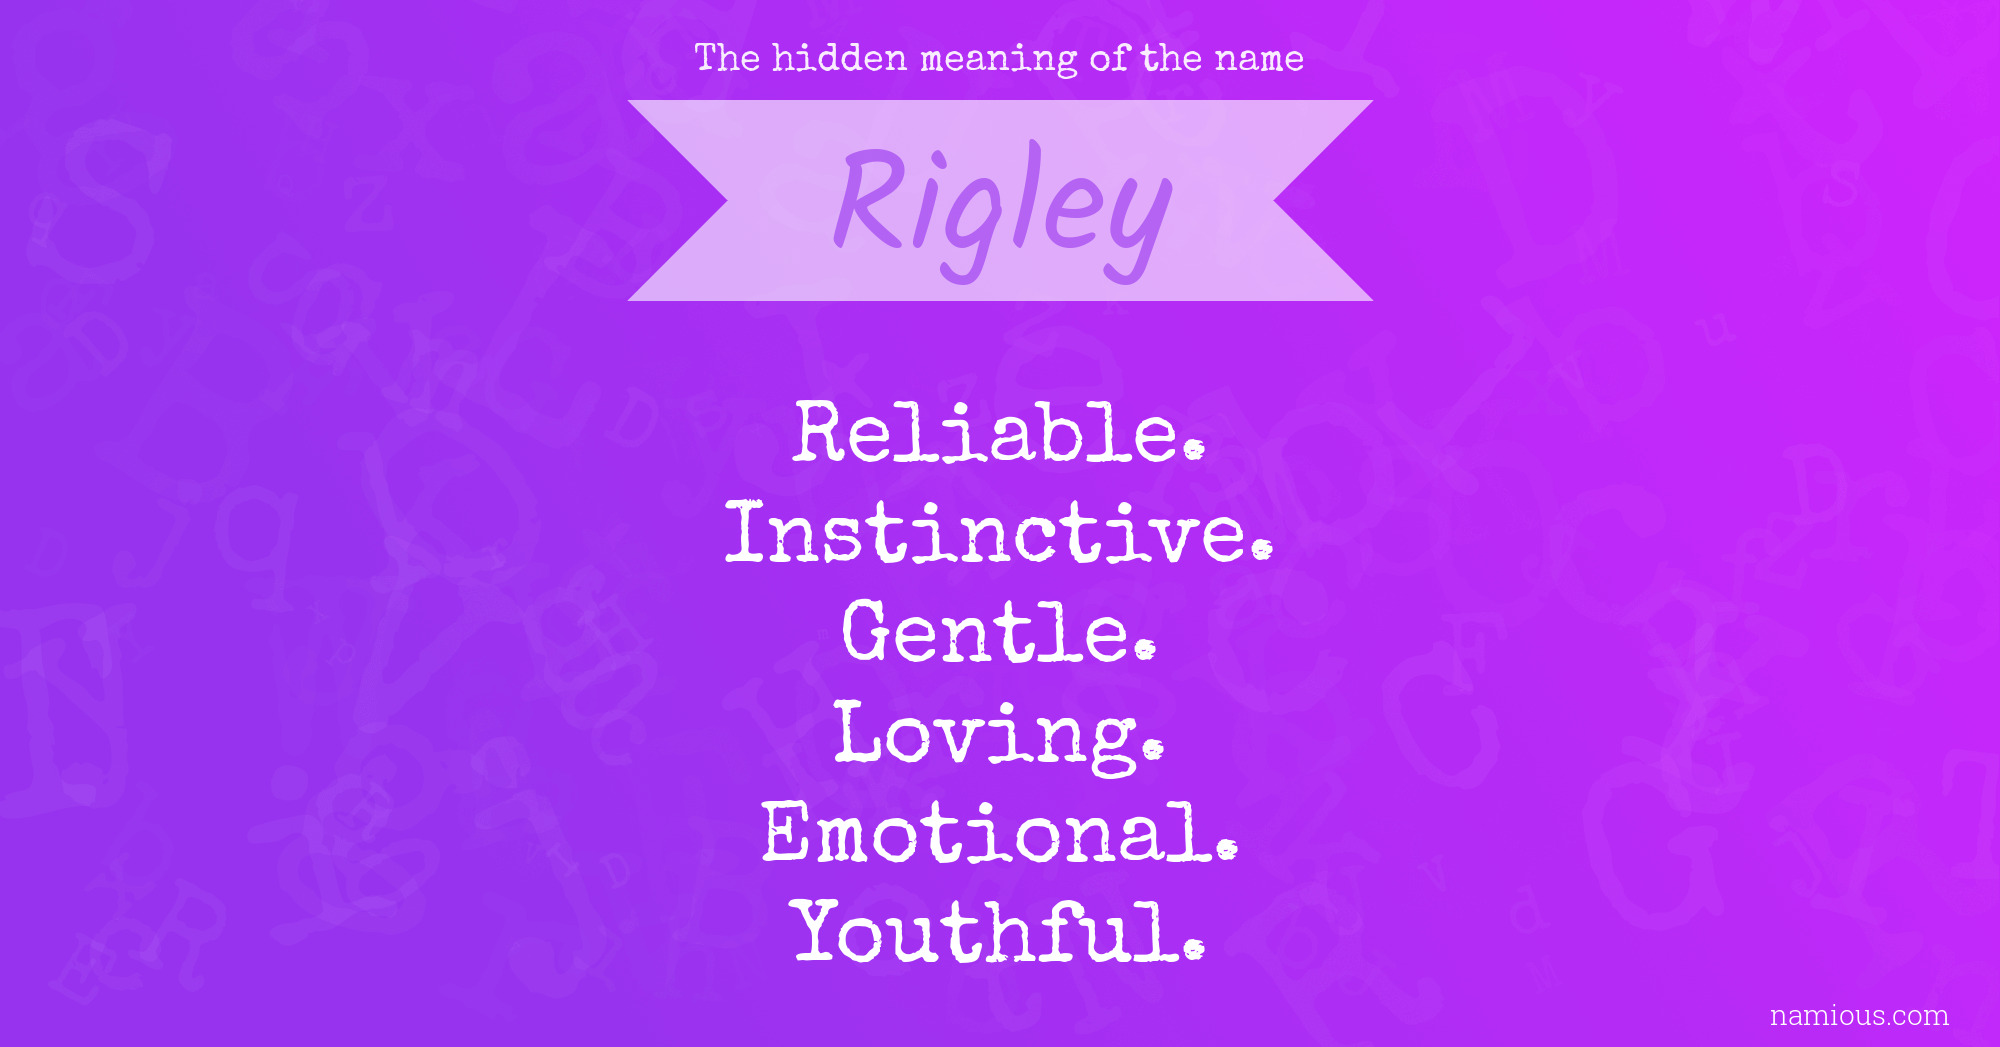 The hidden meaning of the name Rigley